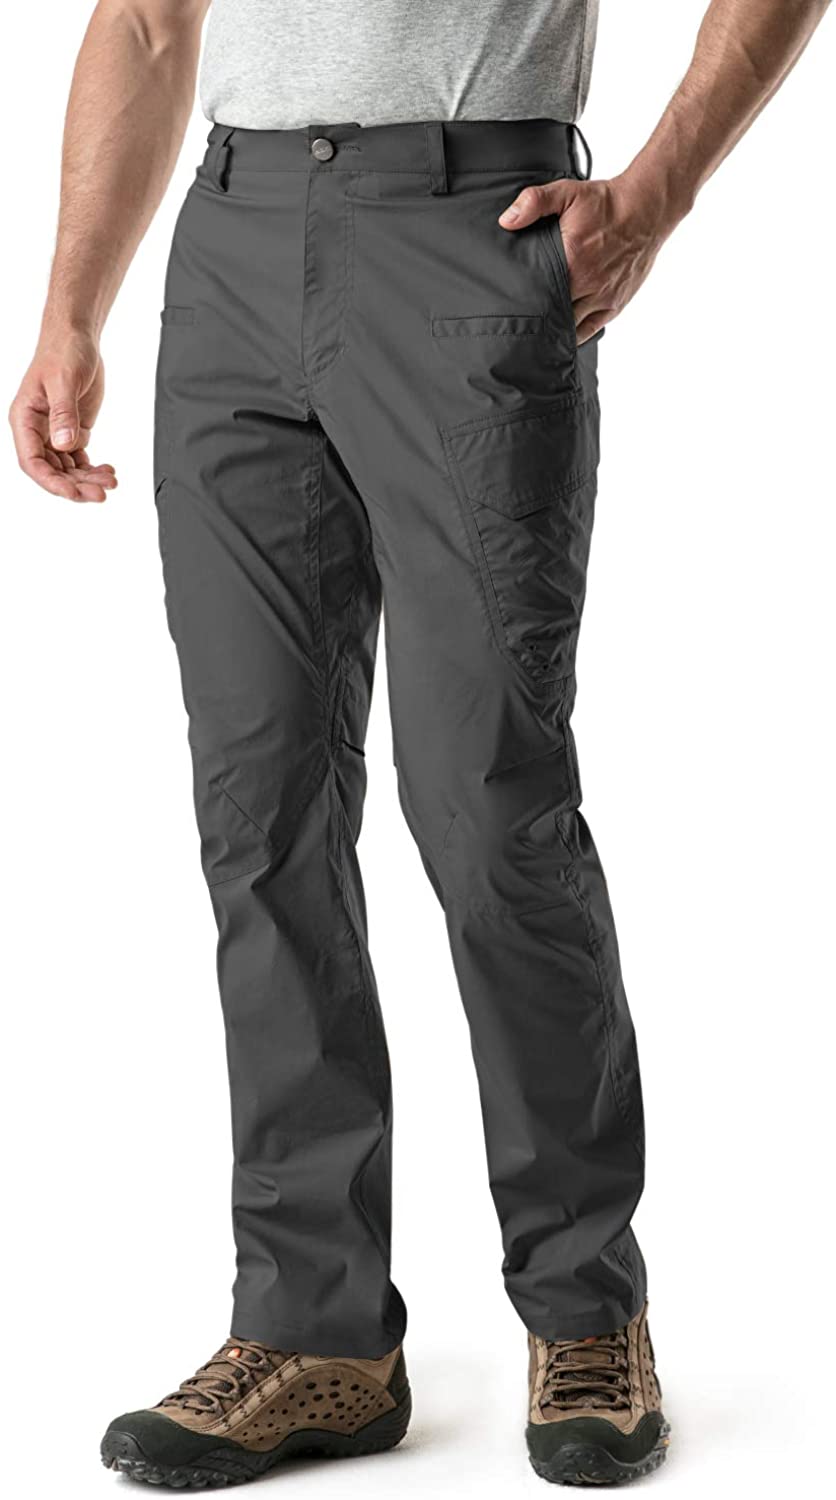 Lightweight Stretch Cargo/Straight Work Pants CQR Men's Hiking Pants UPF 50+ Outdoor Apparel Water Resistant Outdoor Pants 